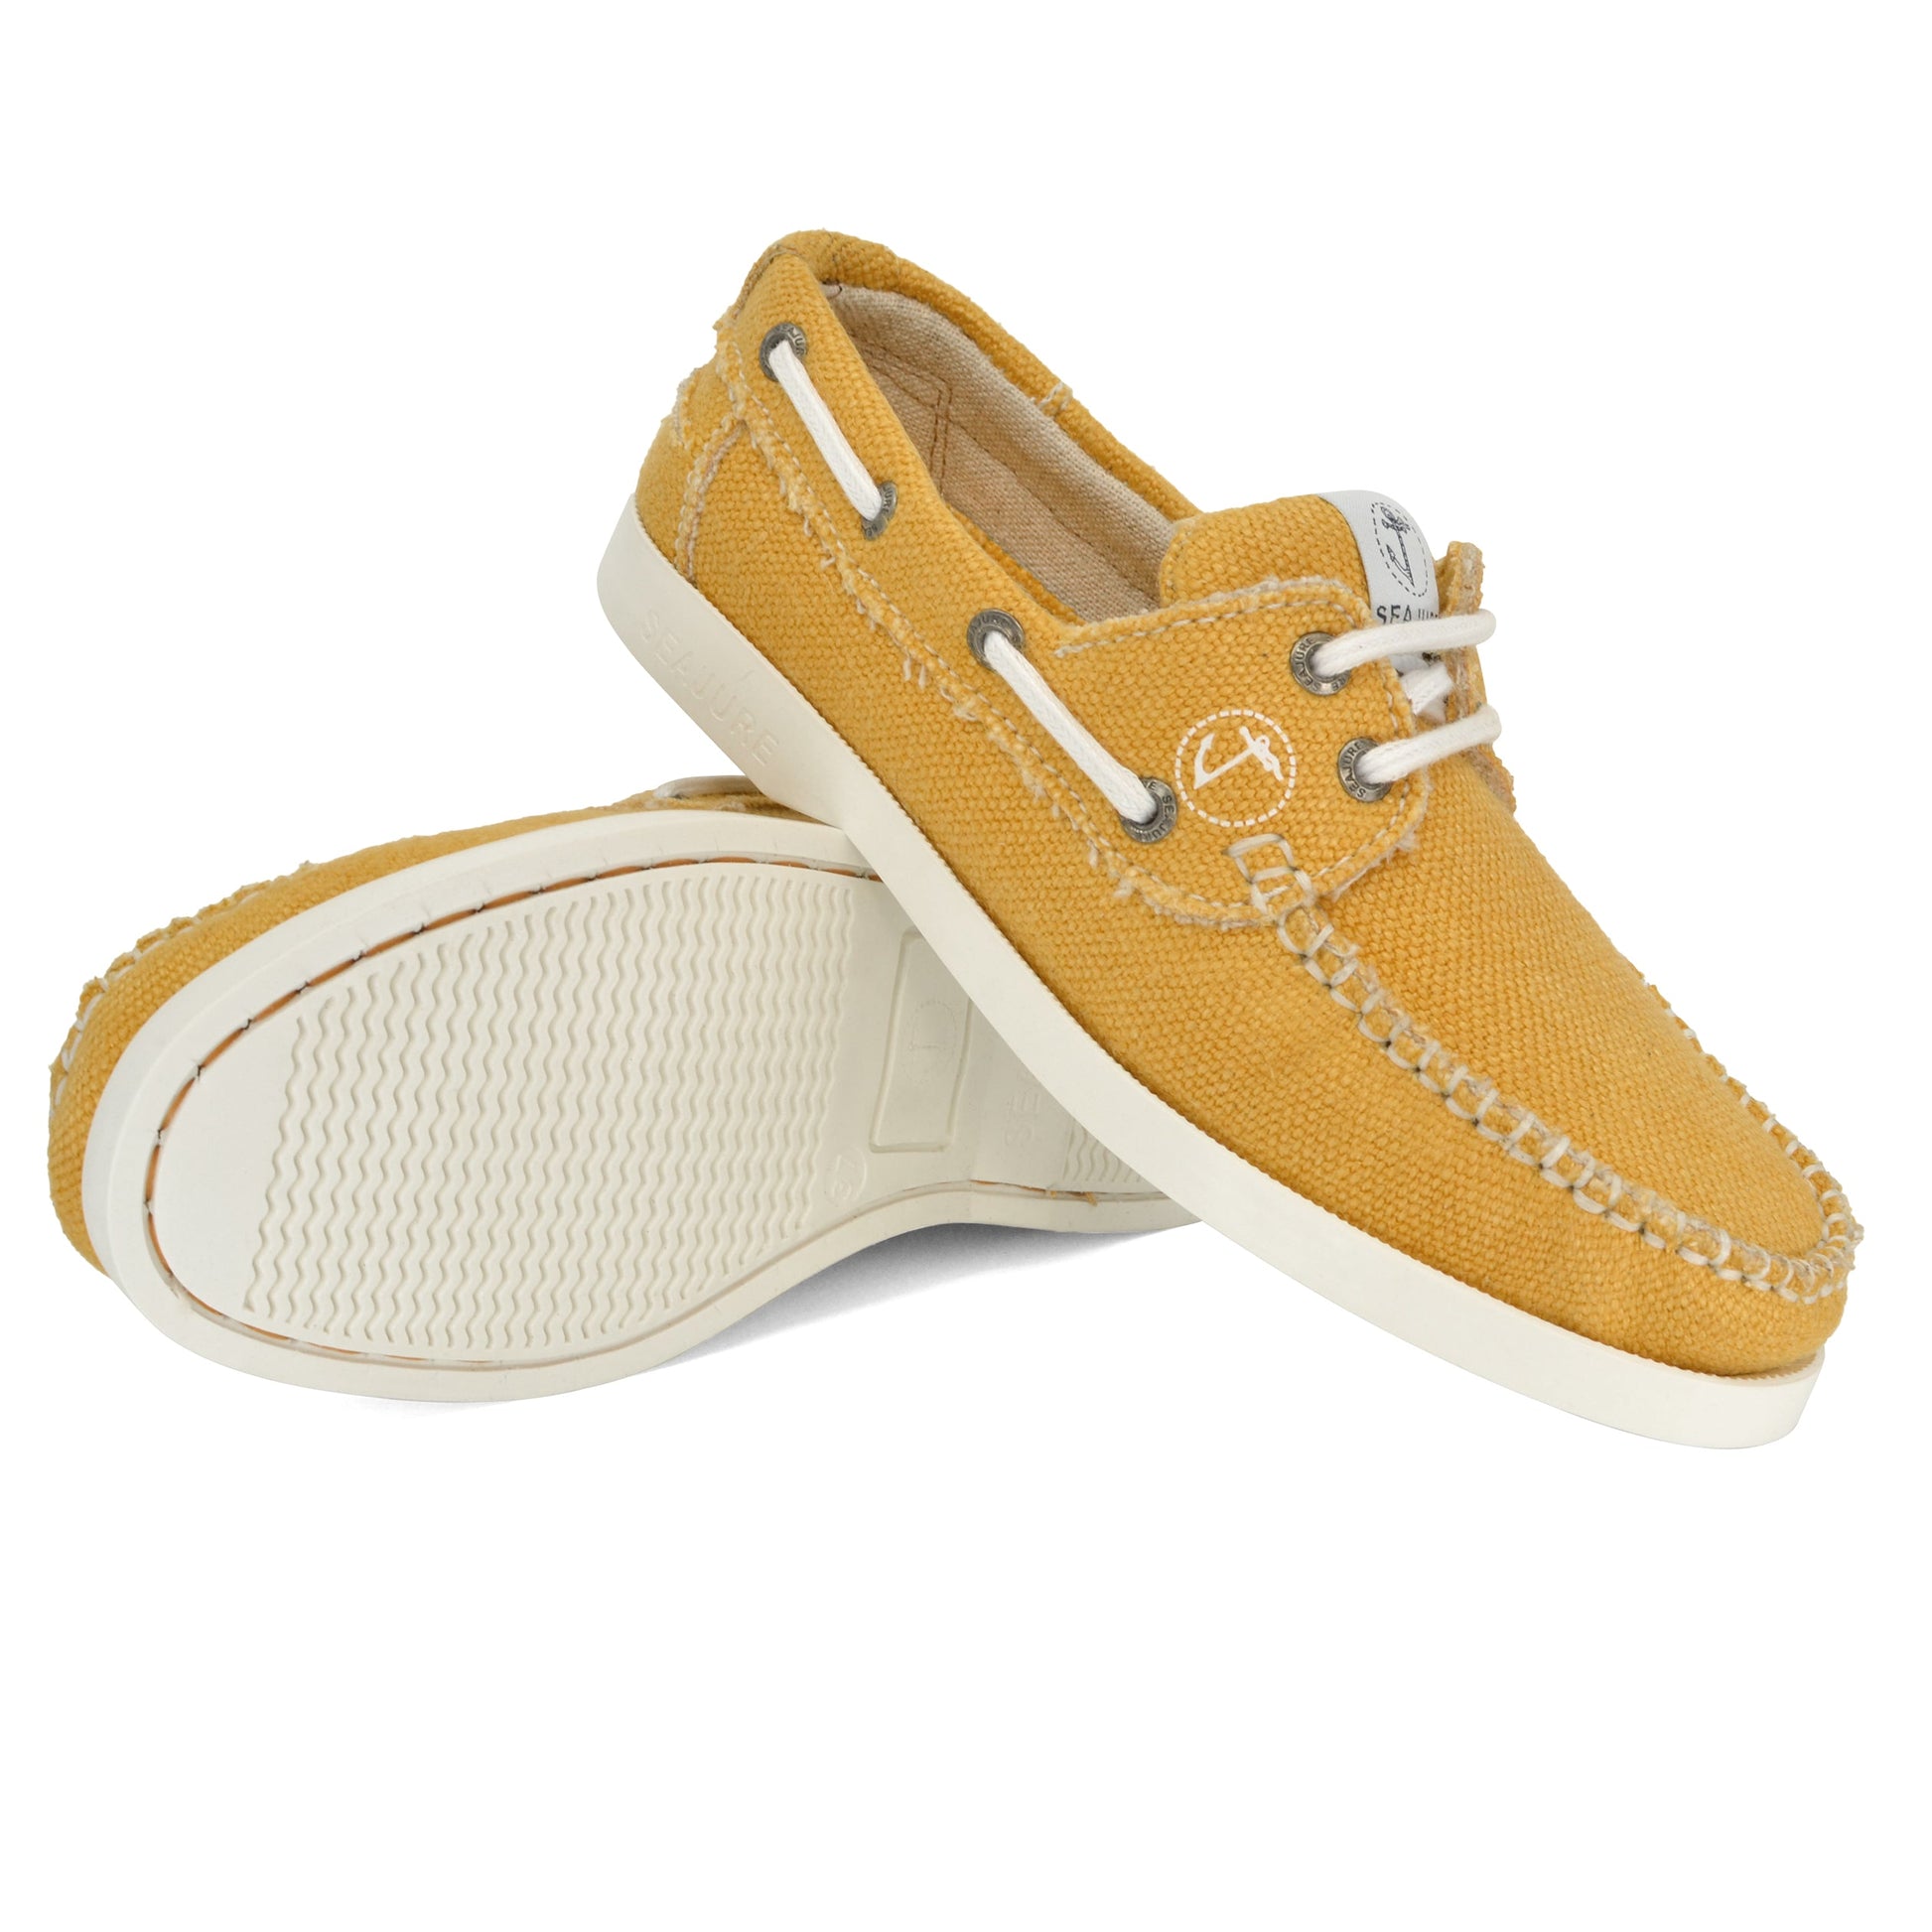 A pair of yellow Amethyst Hestia Women Hemp & Vegan Boat Shoe Saharun with white rubber soles, showing both the top and bottom views. The shoes, made from premium hemp for sustainability, have white laces and stitching details.